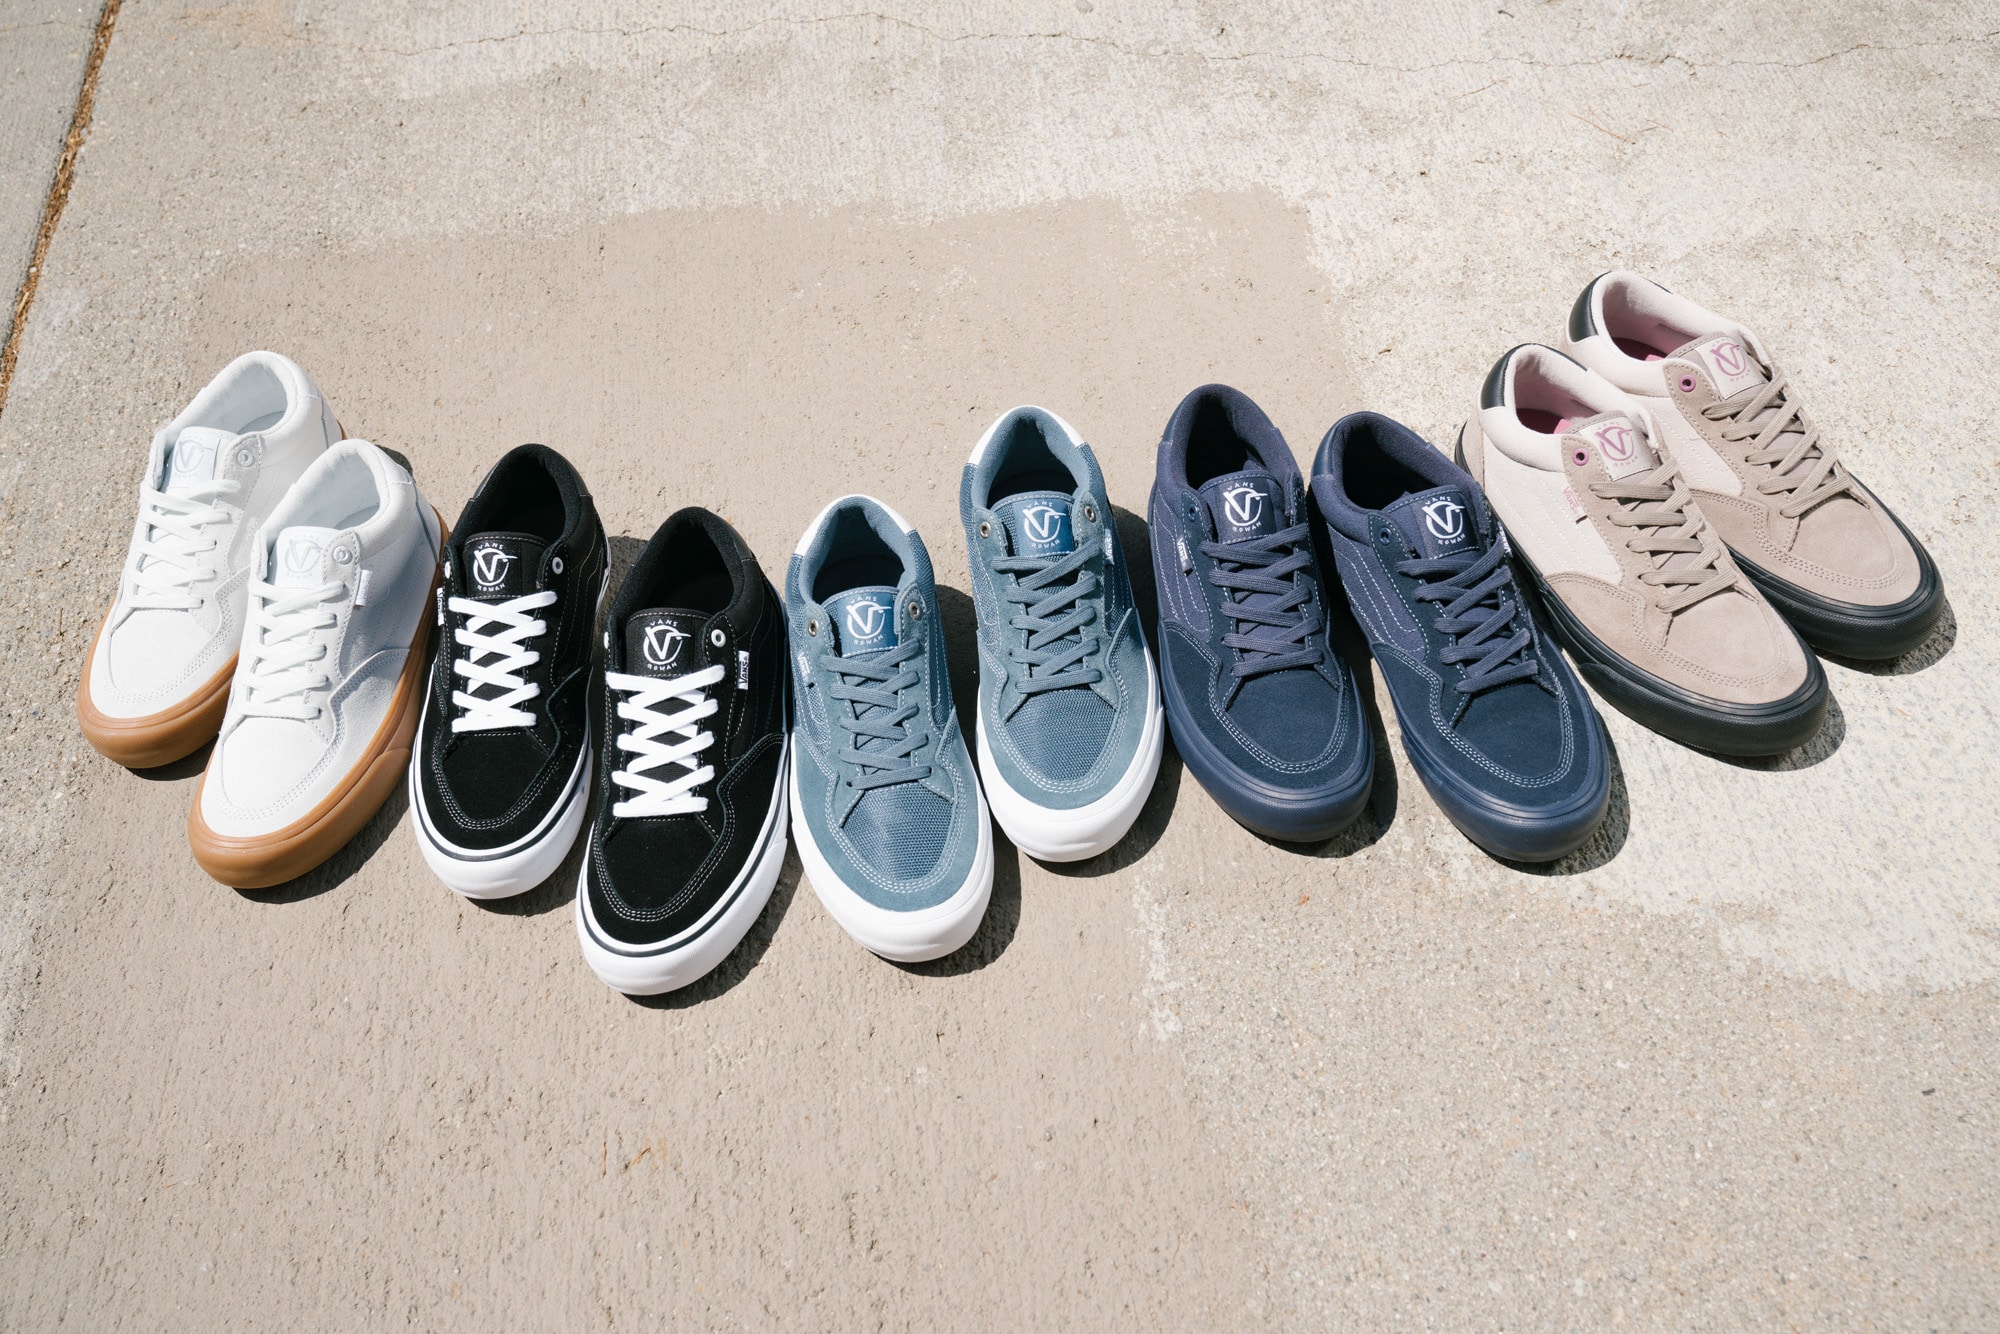 What is the difference between vans Tapered Authentic and vans Tapered Era skate shoes